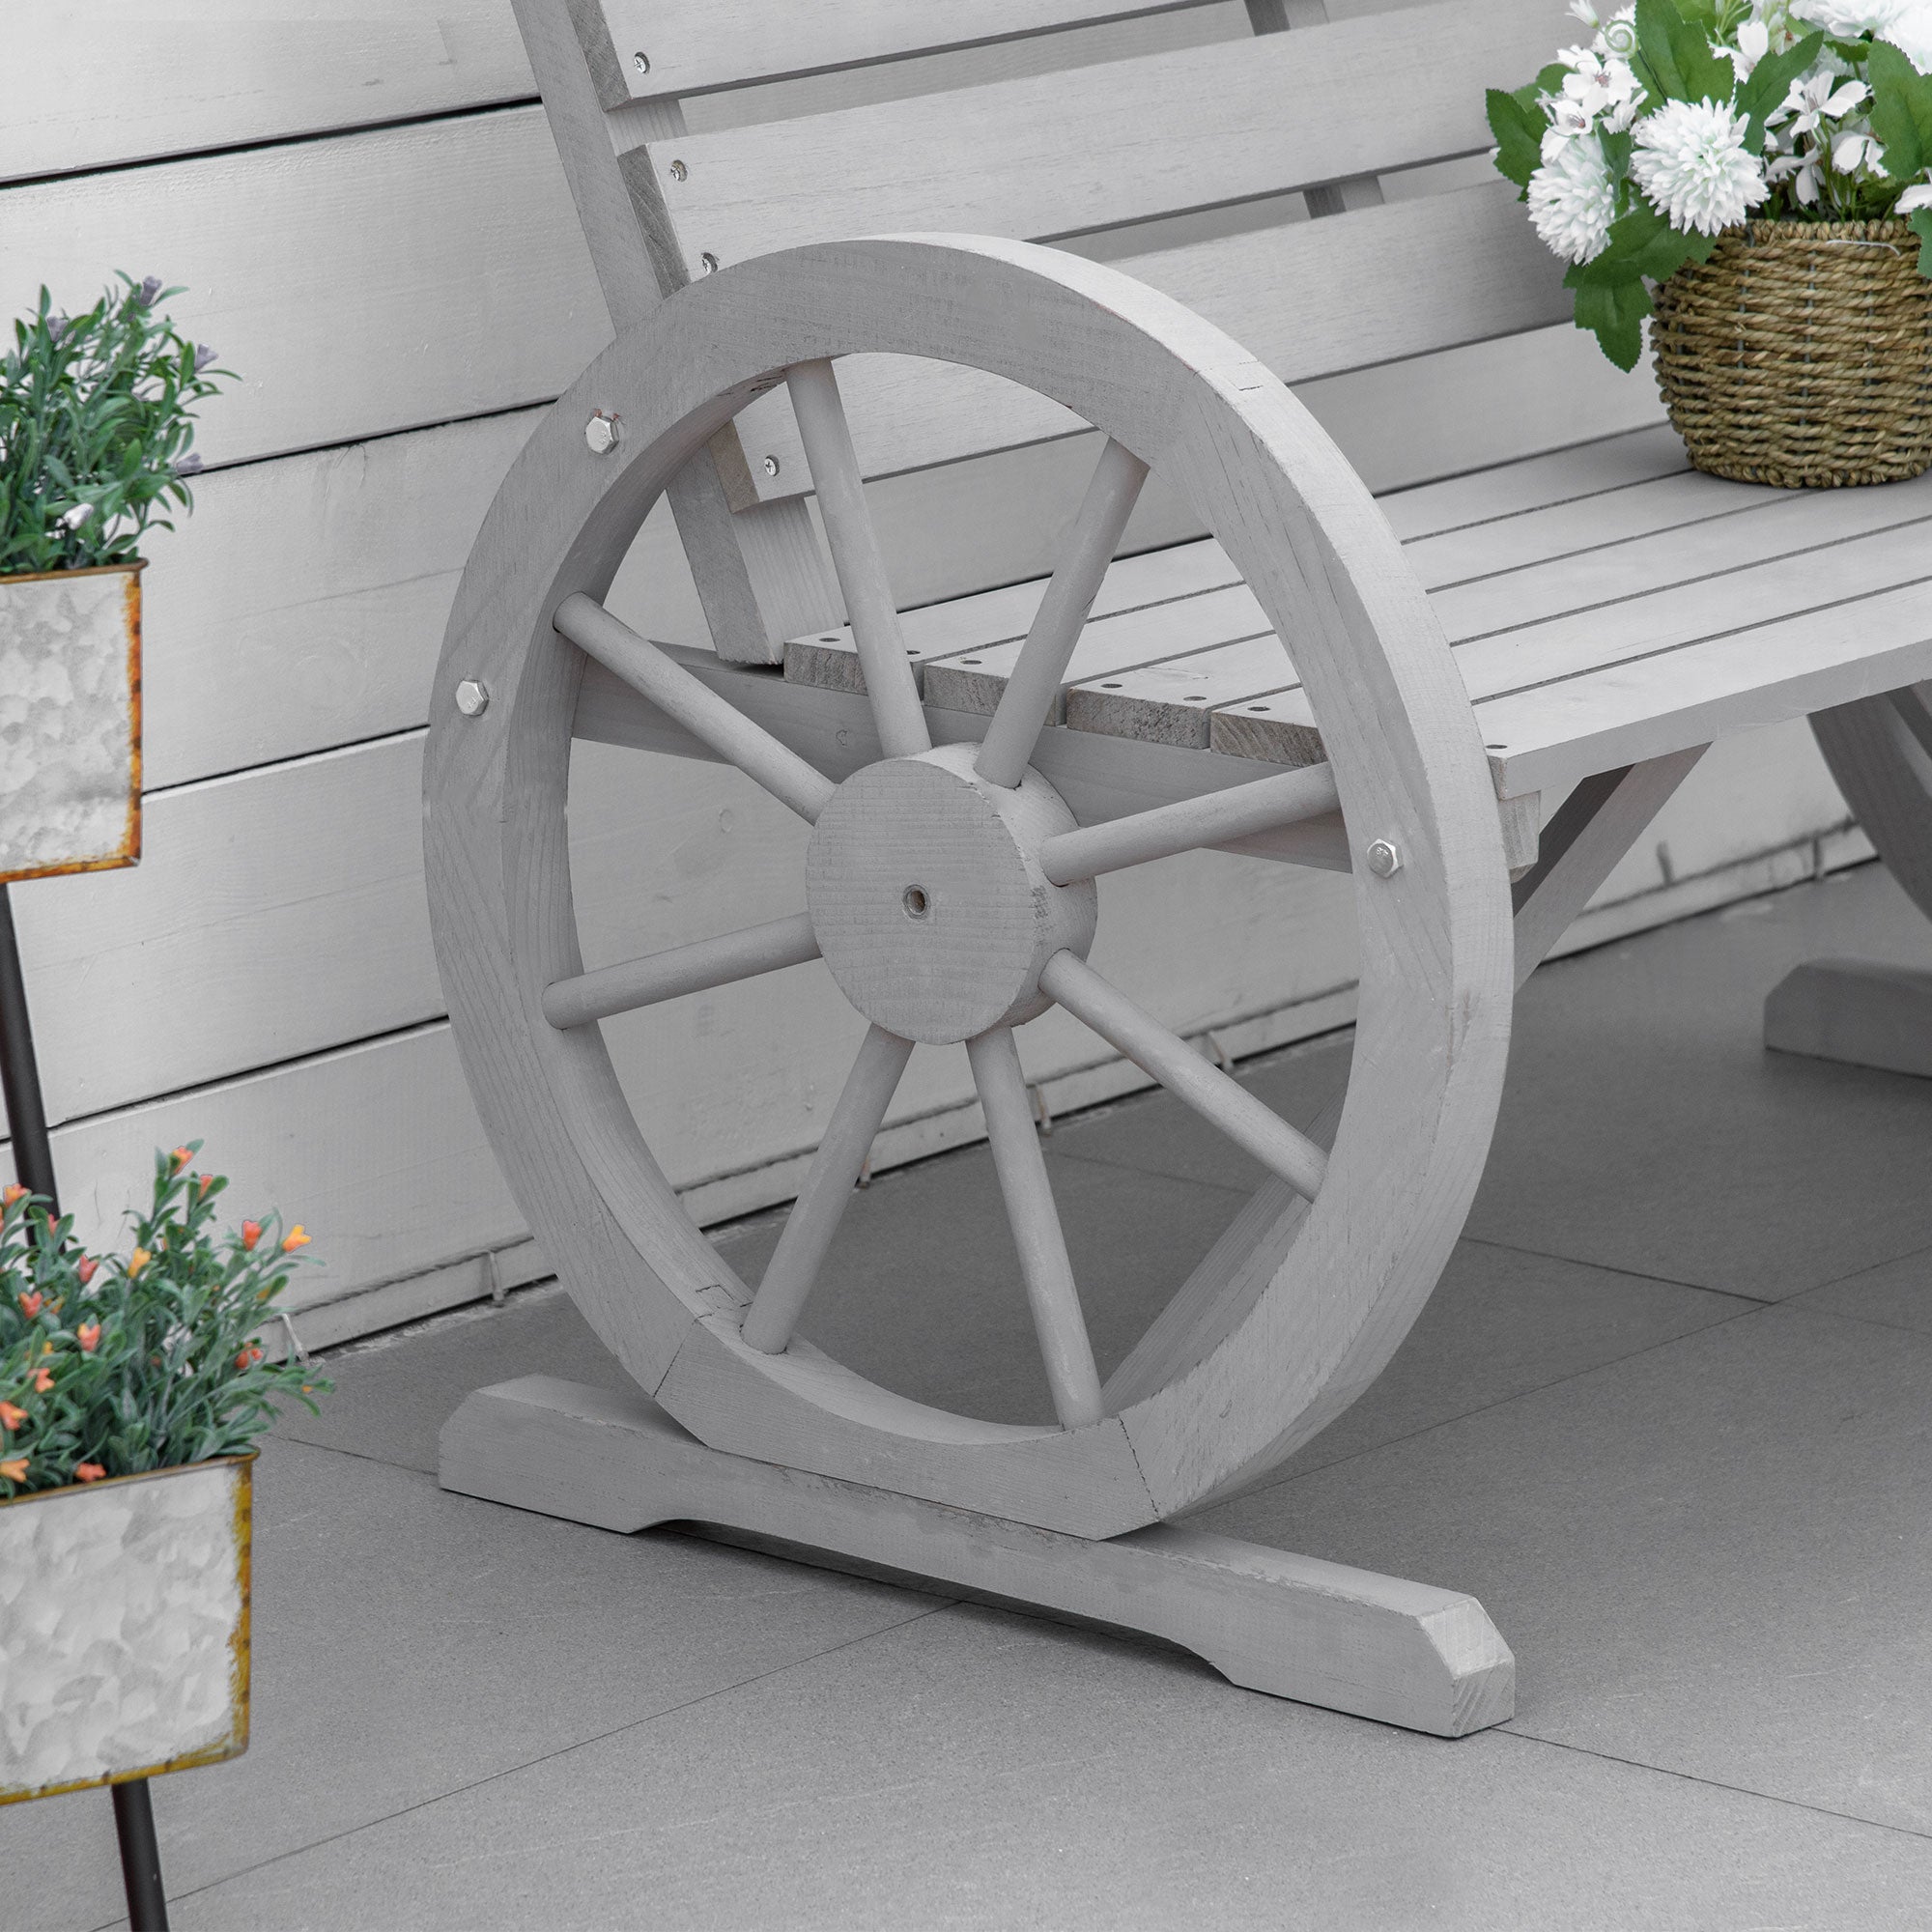 Outsunny 2 Seater Garden Bench Outdoor Garden Armrest Chair with Wooden Cart Wagon Wheel Rustic High Back Grey - Inspirely